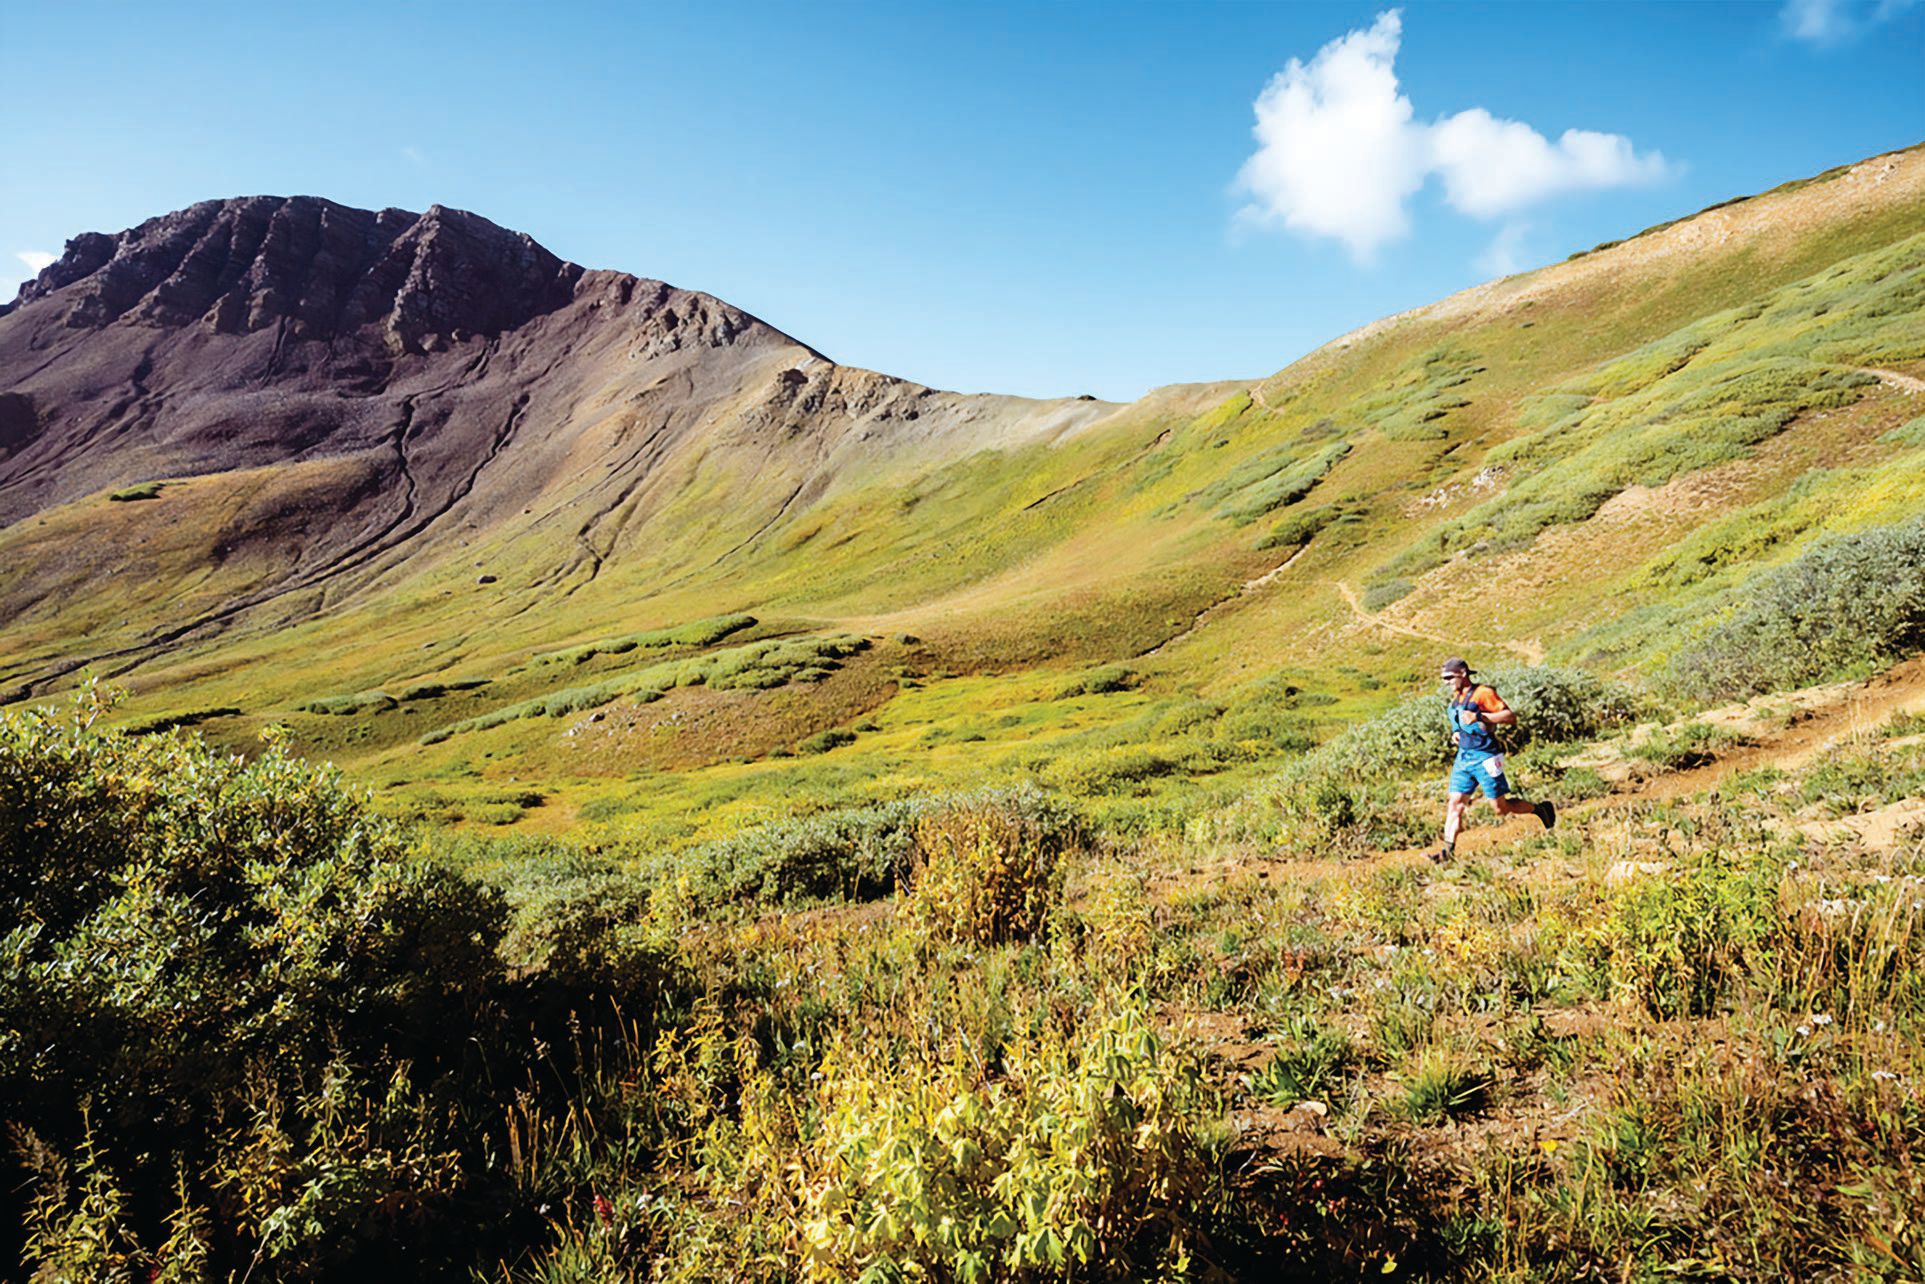 Hamilton competing in the Grand Traverse trail run from Crested Butte to Aspen PHOTO BY PETAR DOPCHEV